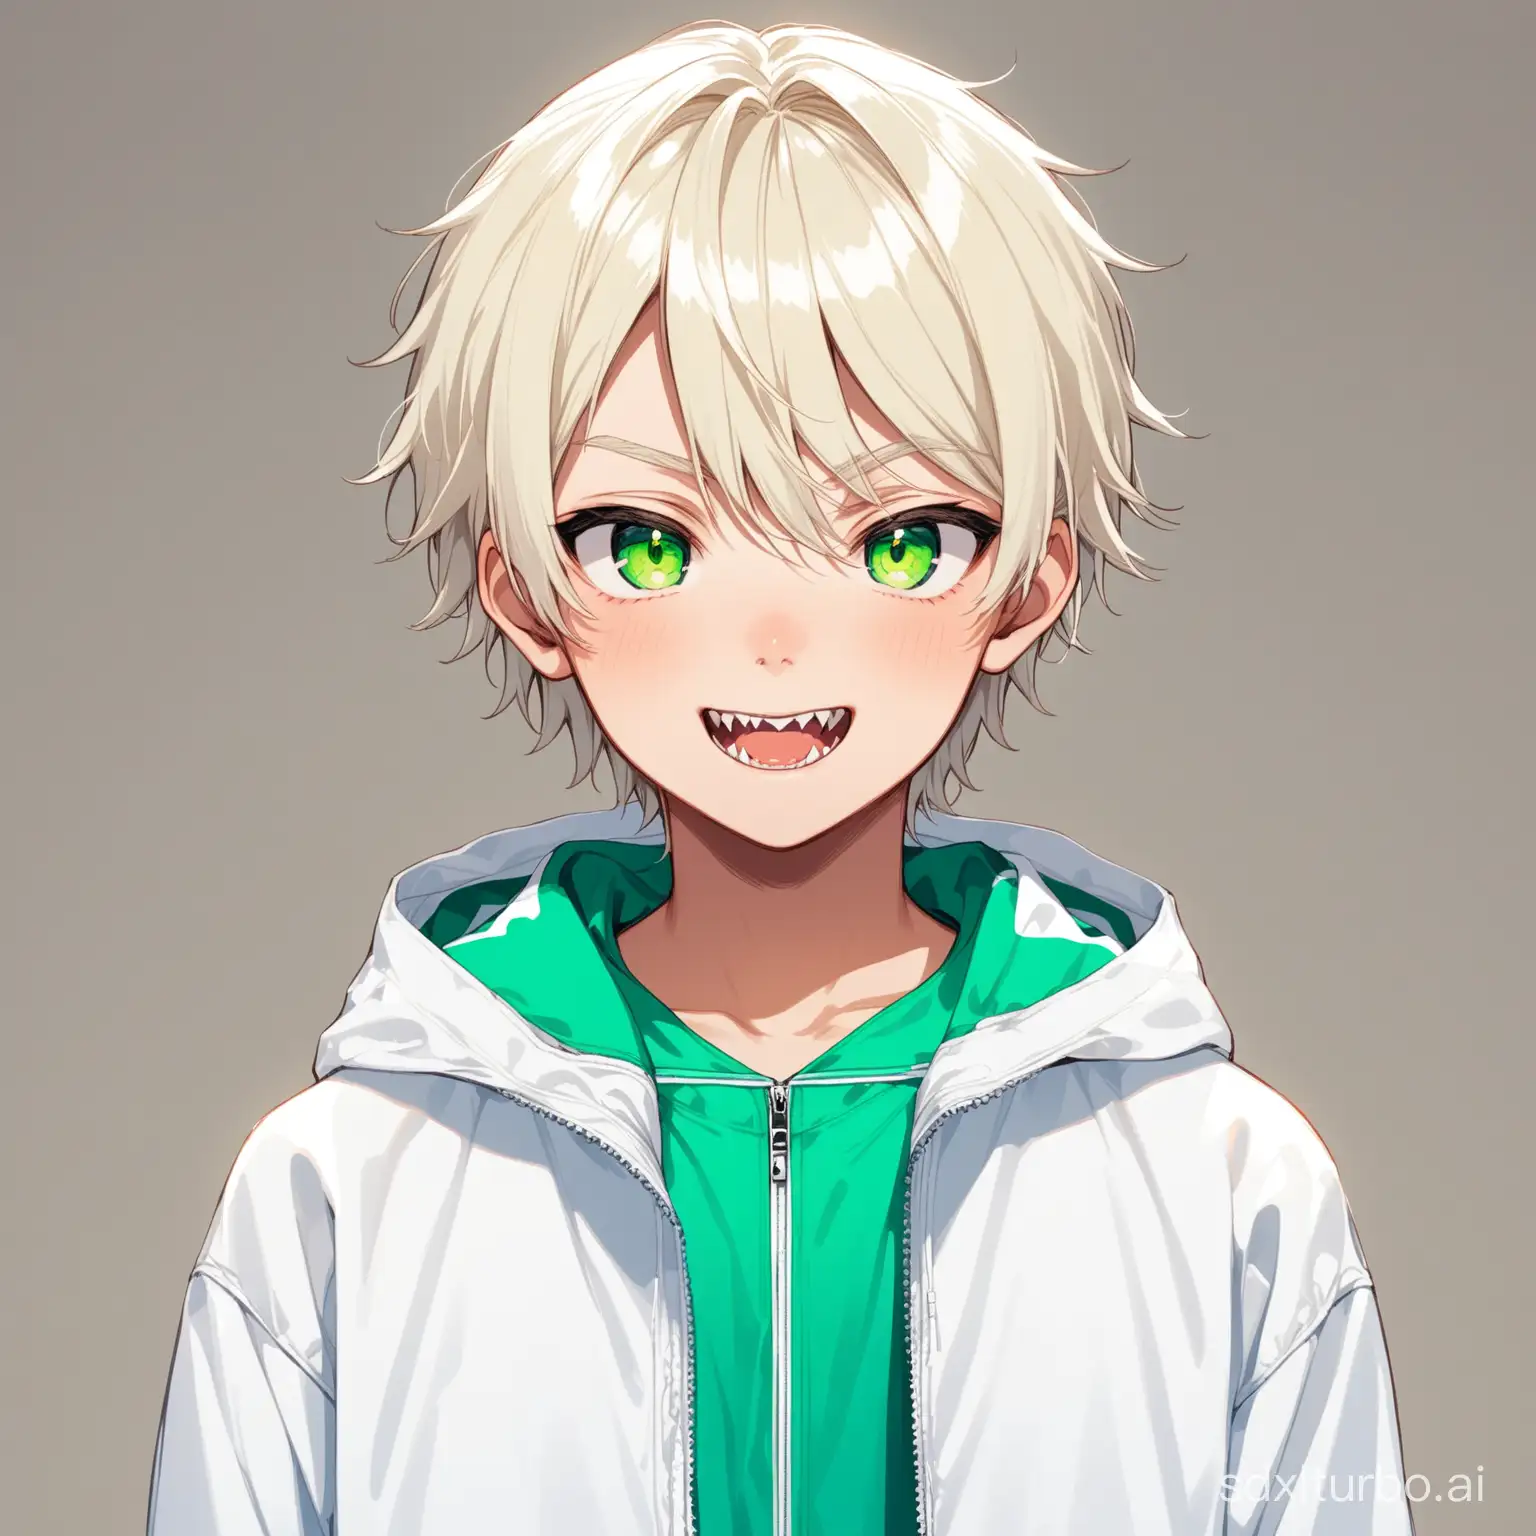 Platinum-Blonde-Boy-with-Green-Eyes-and-Fangs-in-White-Windbreaker